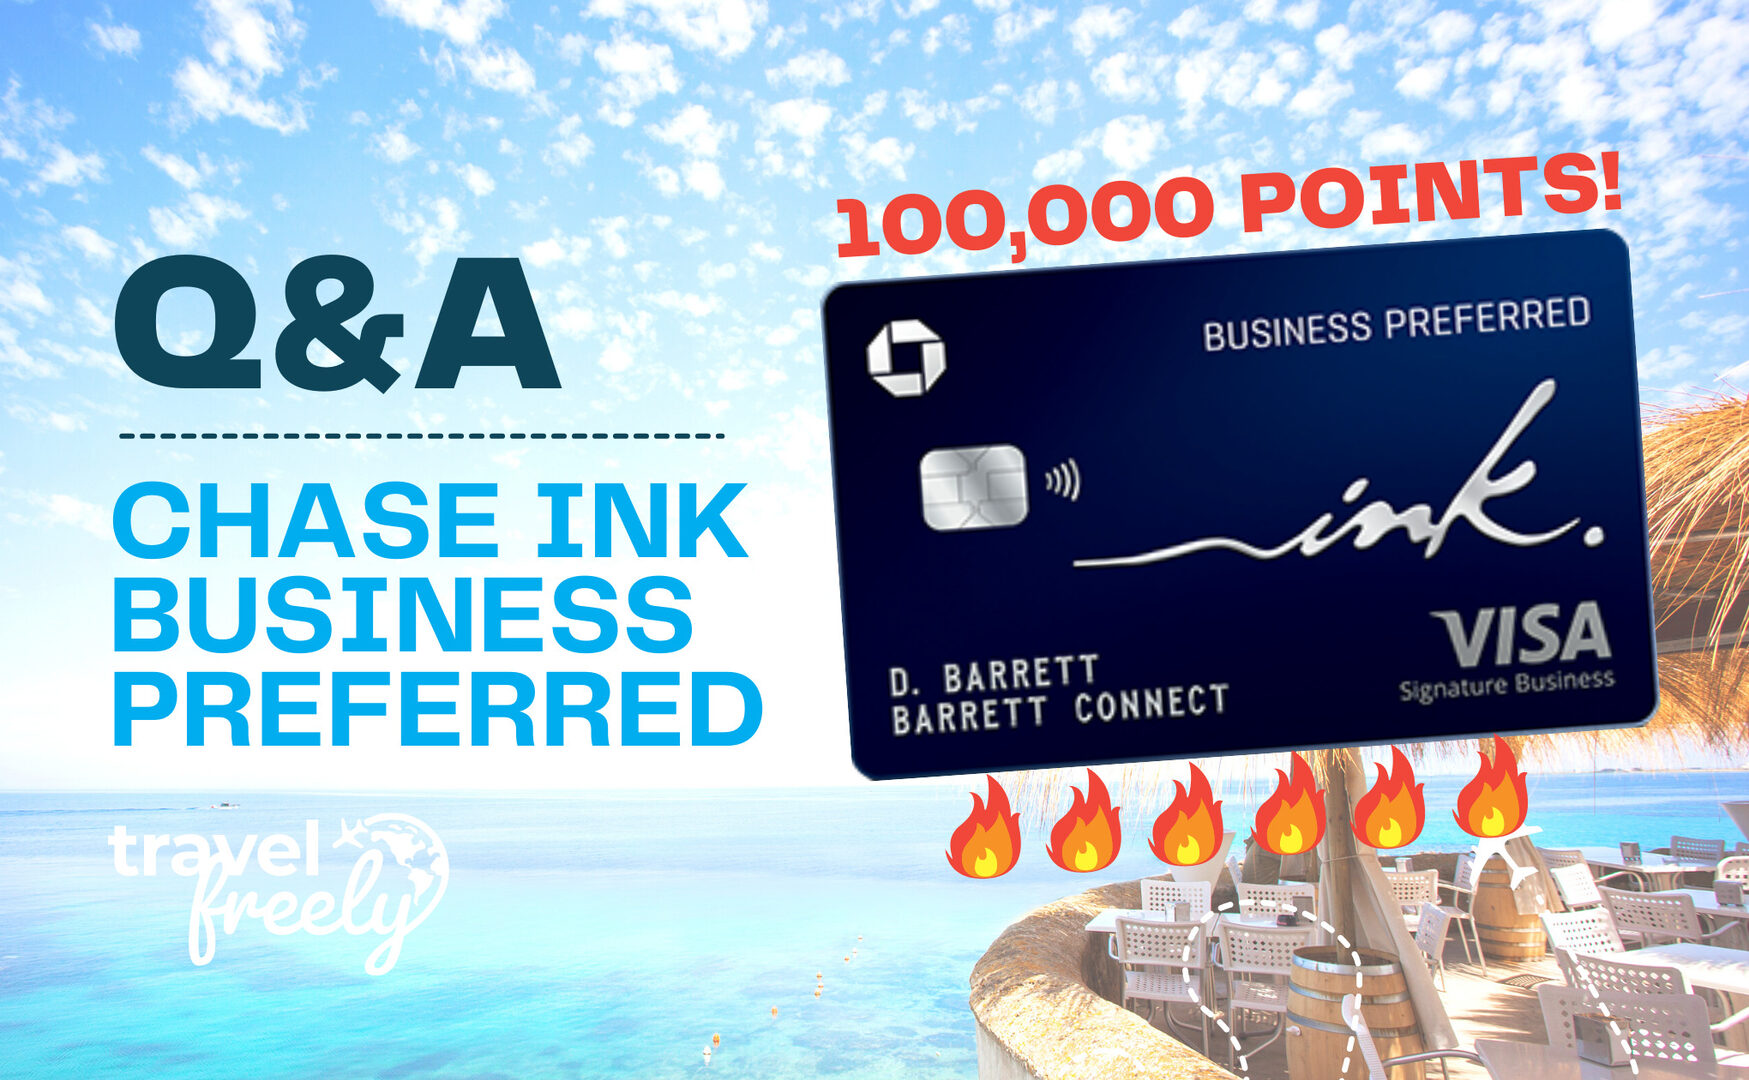 Chase Ink Preferred 100,000 points